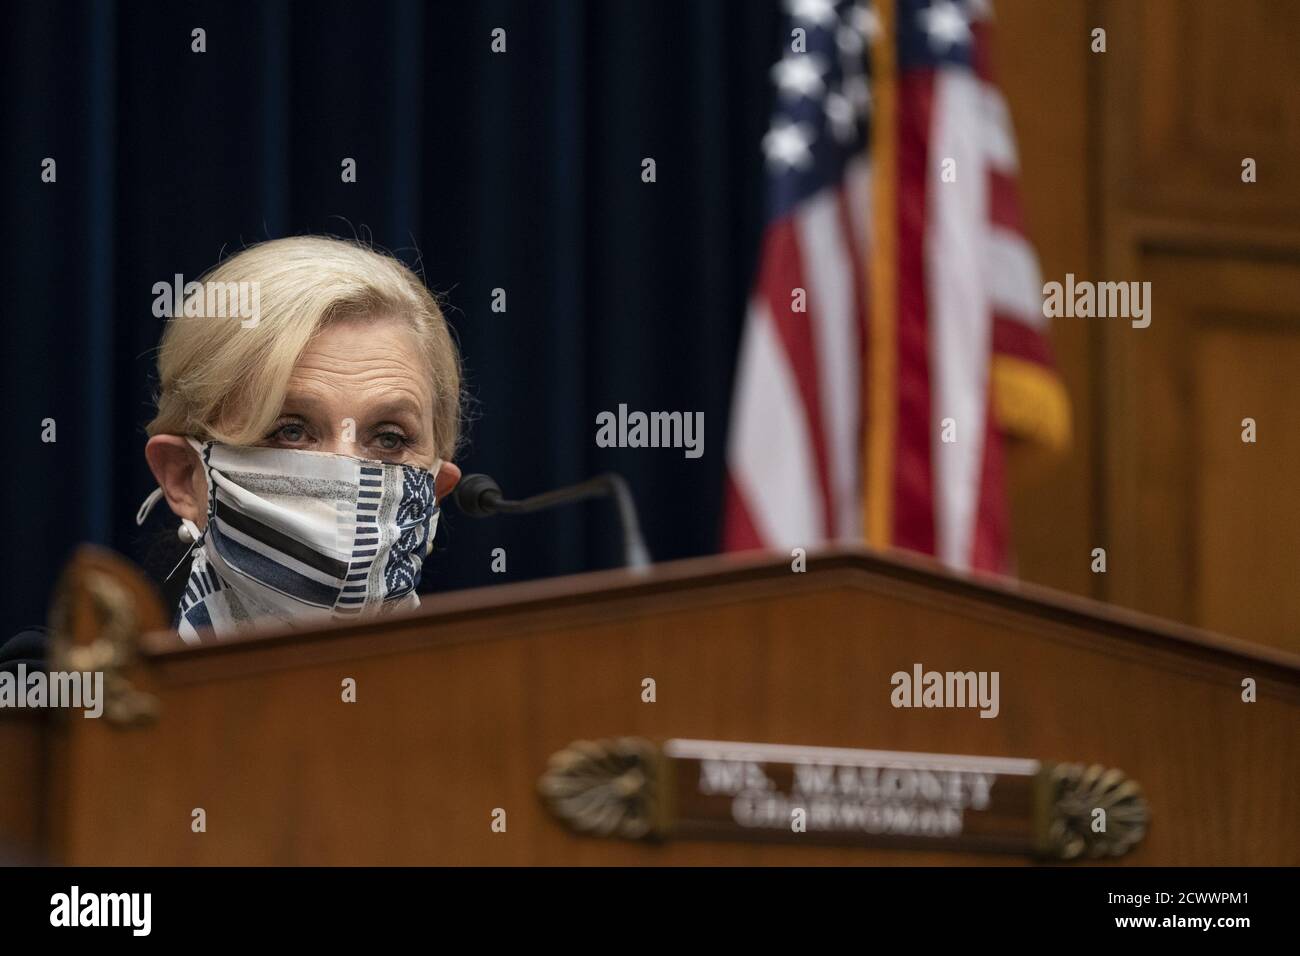 Washington, United States. 30th Sep, 2020. Chairwoman Carolyn Maloney delivers her opening statement during a hearing before the U.S. House of Representatives Committee on Oversight and Reform focused on the cost of prescription drugs at the US Capitol Building in Washington, DC, on Wednesday, September 30, 2020. Several CEO's of drug companies will testify. Pool Photo by Alex Edelman/UPI Credit: UPI/Alamy Live News Stock Photo